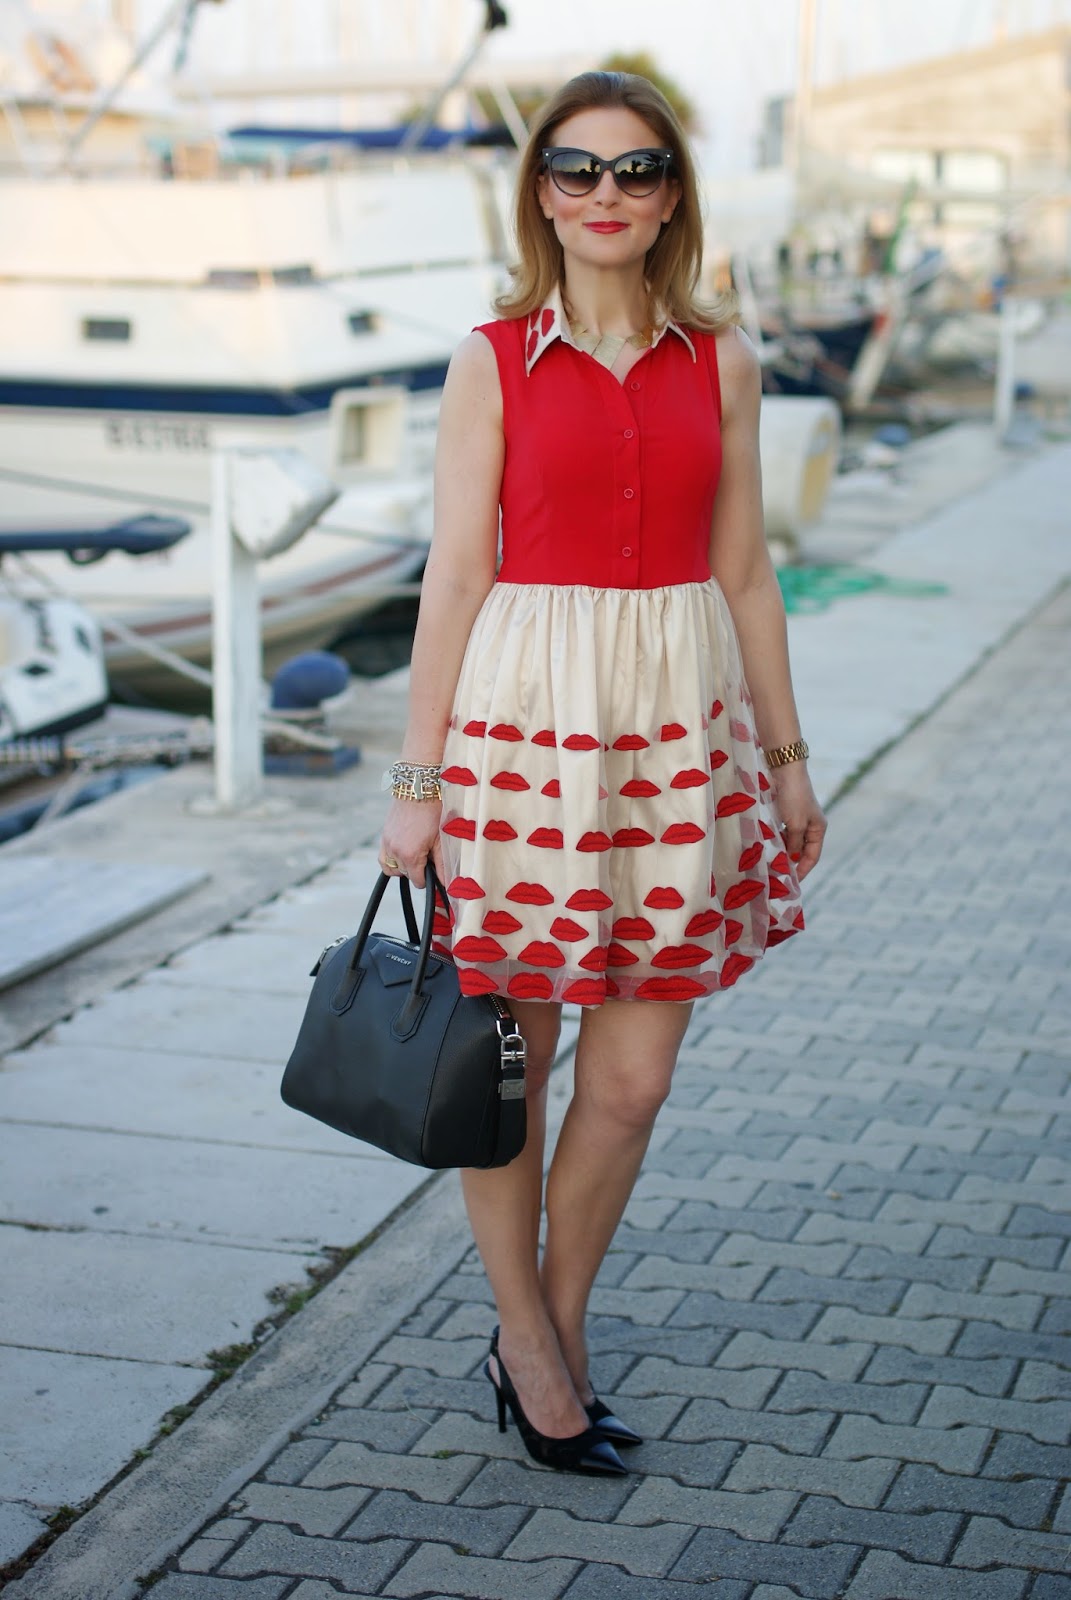 Red lips dress | Fashion and Cookies - fashion and beauty blog